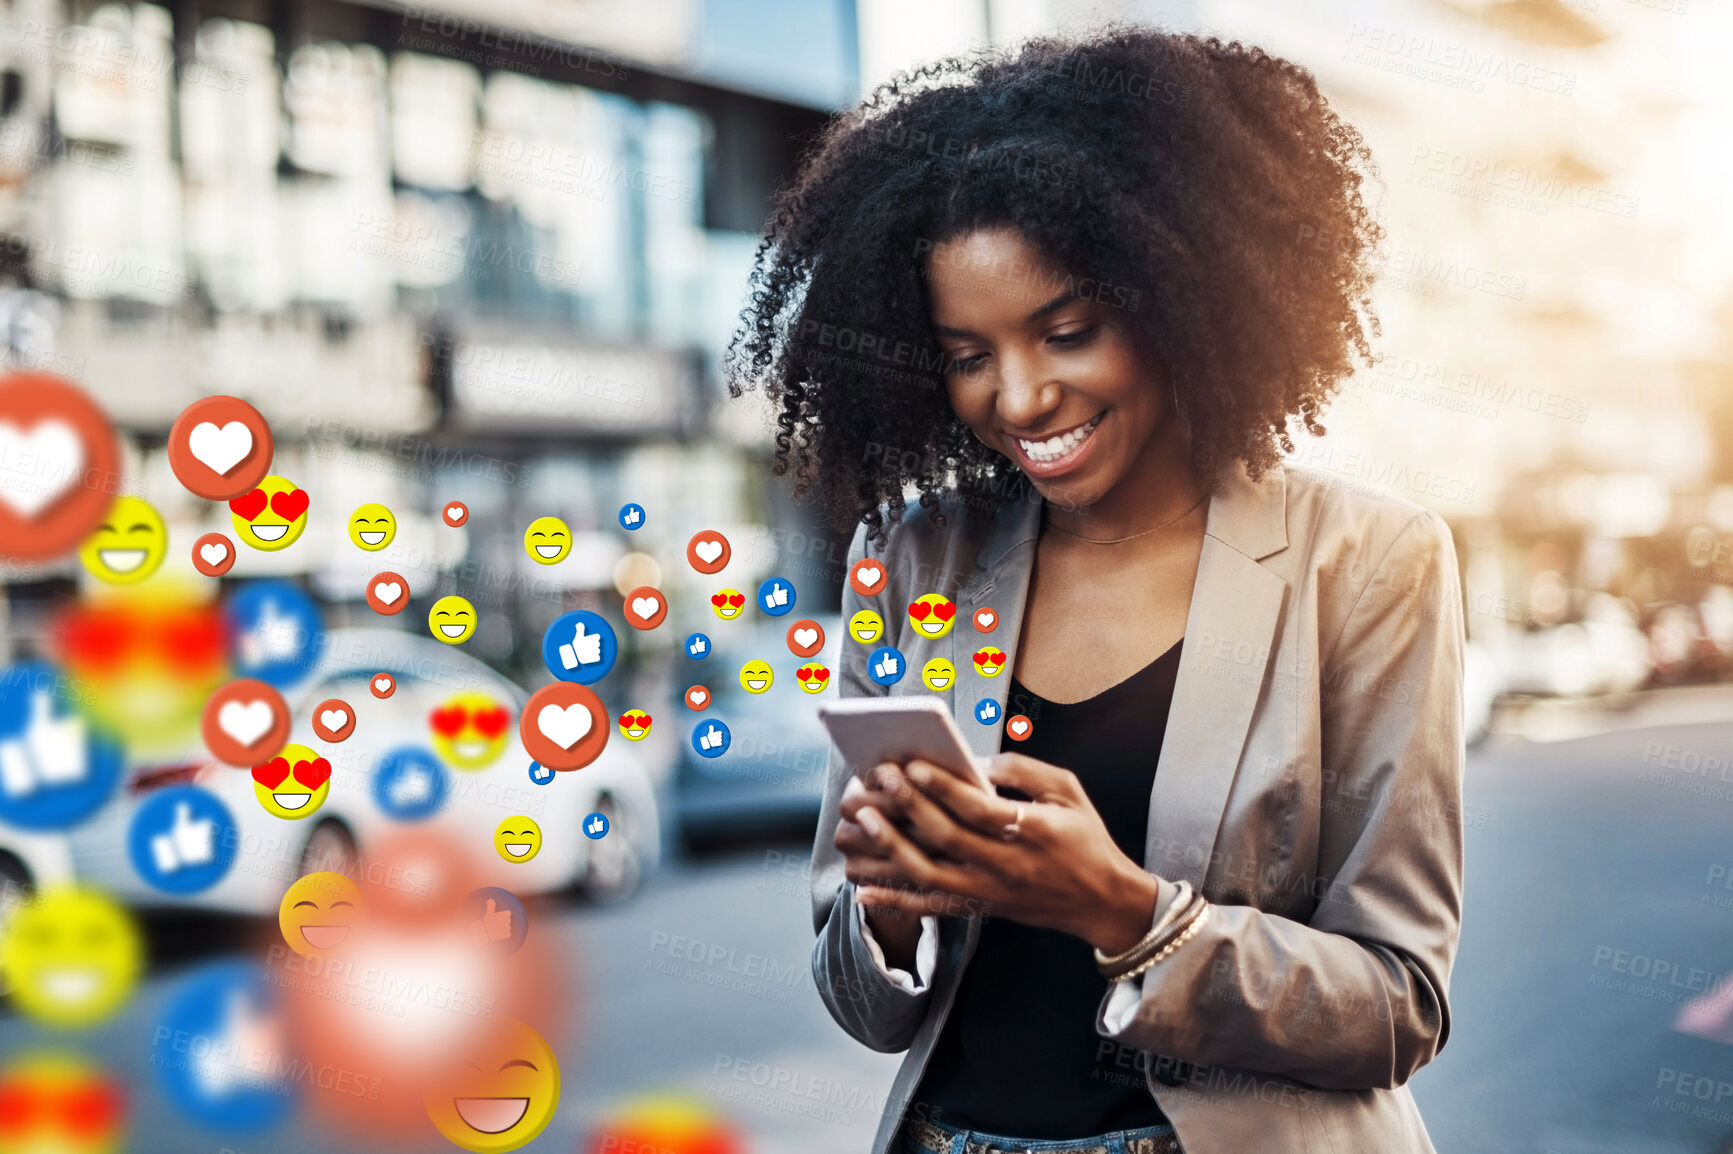 Buy stock photo City, social media icon or black woman with phone for communication, texting or online chat website. Overlay, smile or happy girl typing on mobile app or digital networking with like or heart emoji 